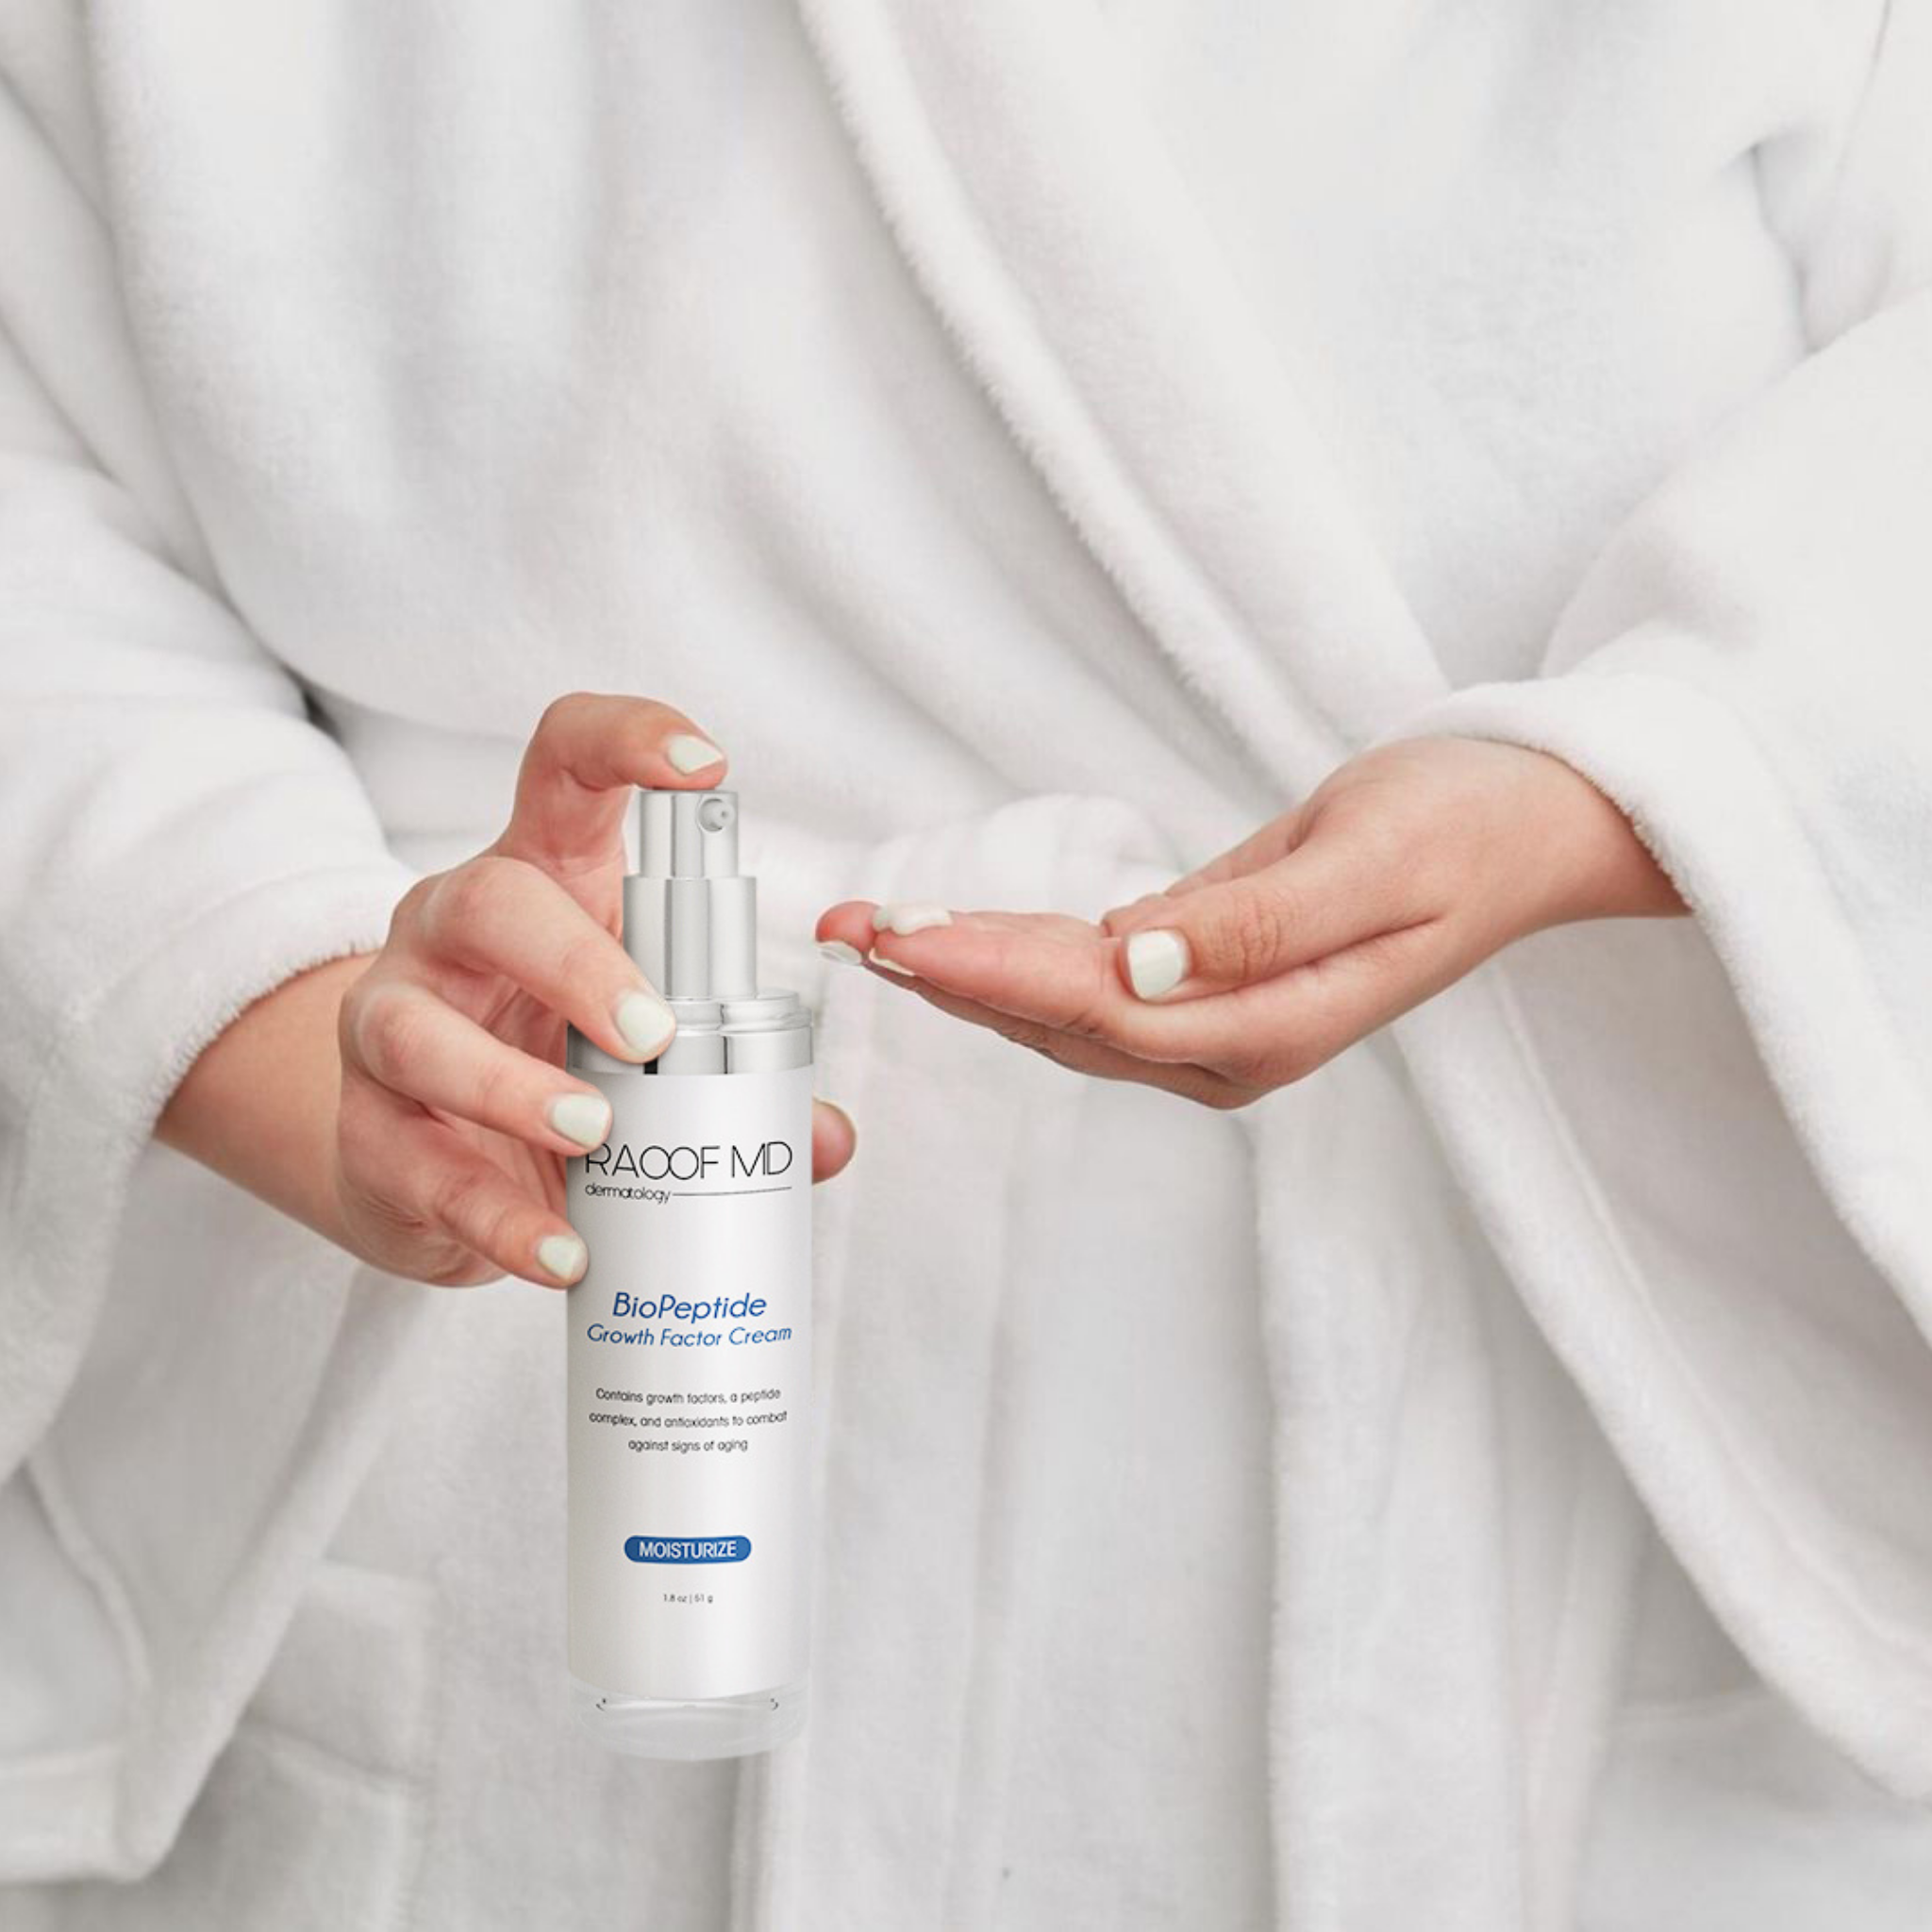 Woman in White Robe Holding BioPeptide Growth Factor Cream by RAOOF MD dermatology 